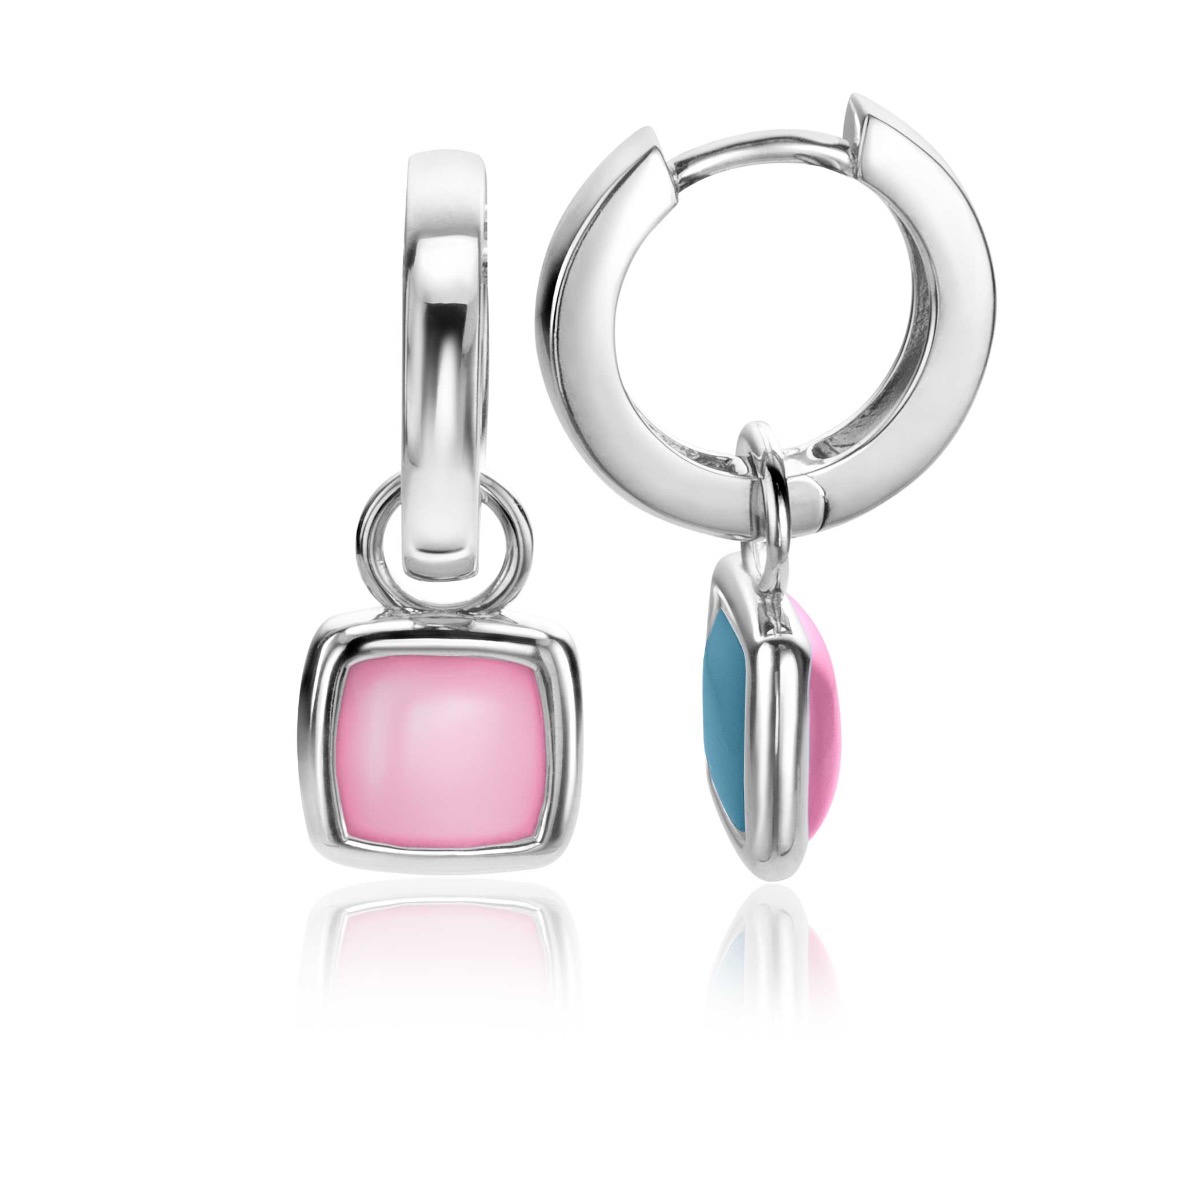 10mm ZINZI Sterling Silver Earrings Pendants Square Two-sided Blue and Pink ZICH2257 (excl. hoop earrings)